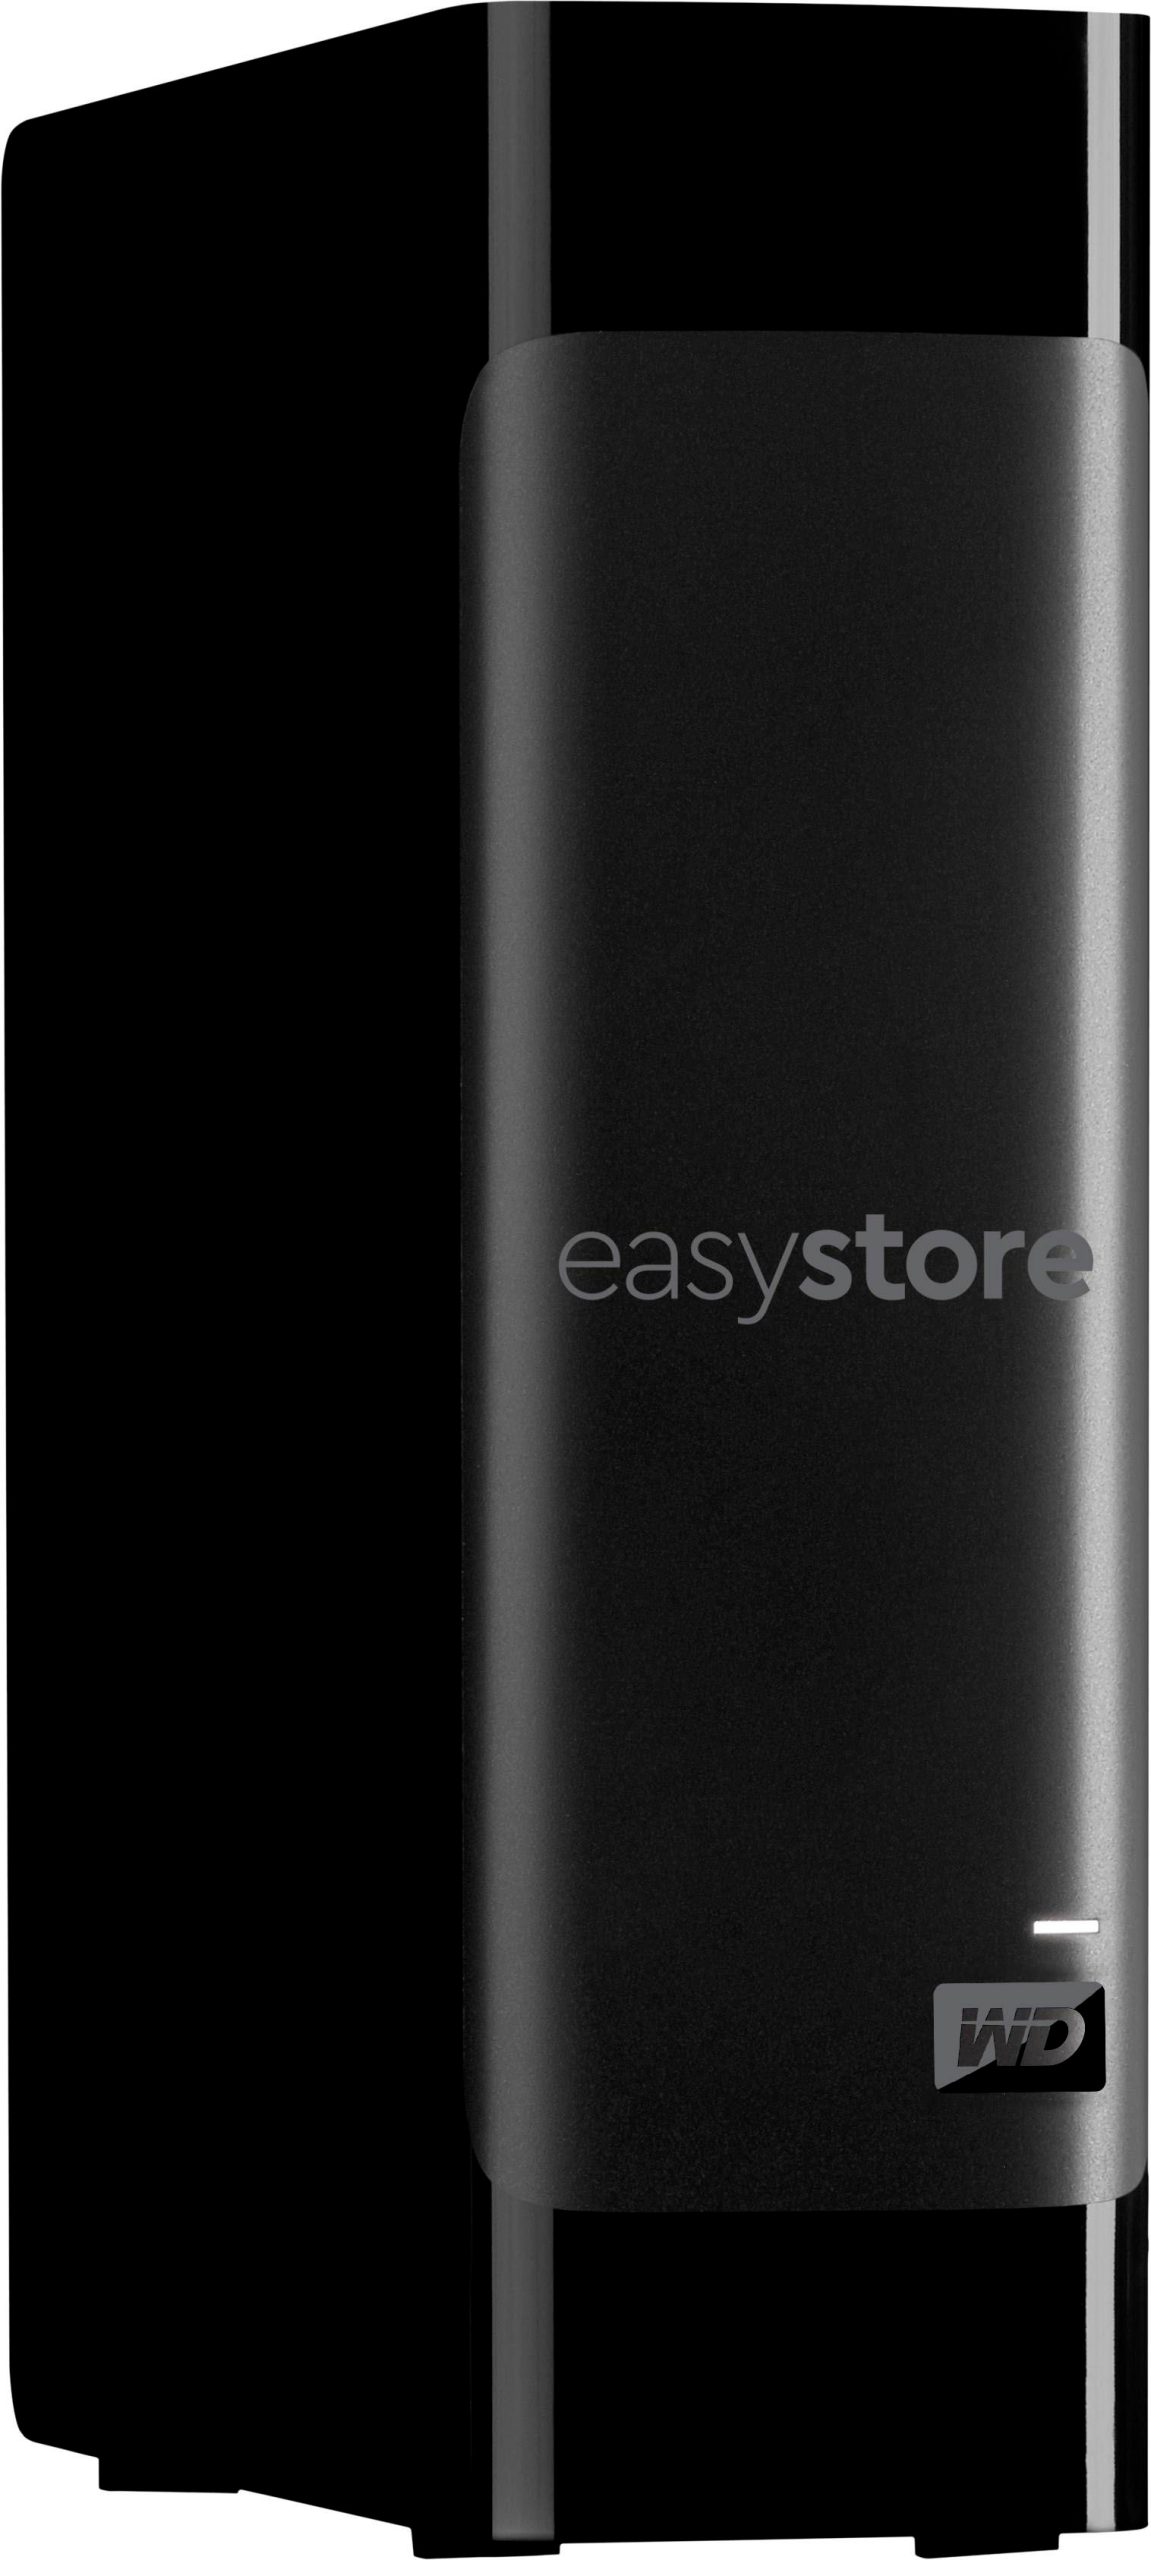 WD – easystore 14TB External USB 3.0 Hard Drive – Black – Just $219.99 at Best Buy